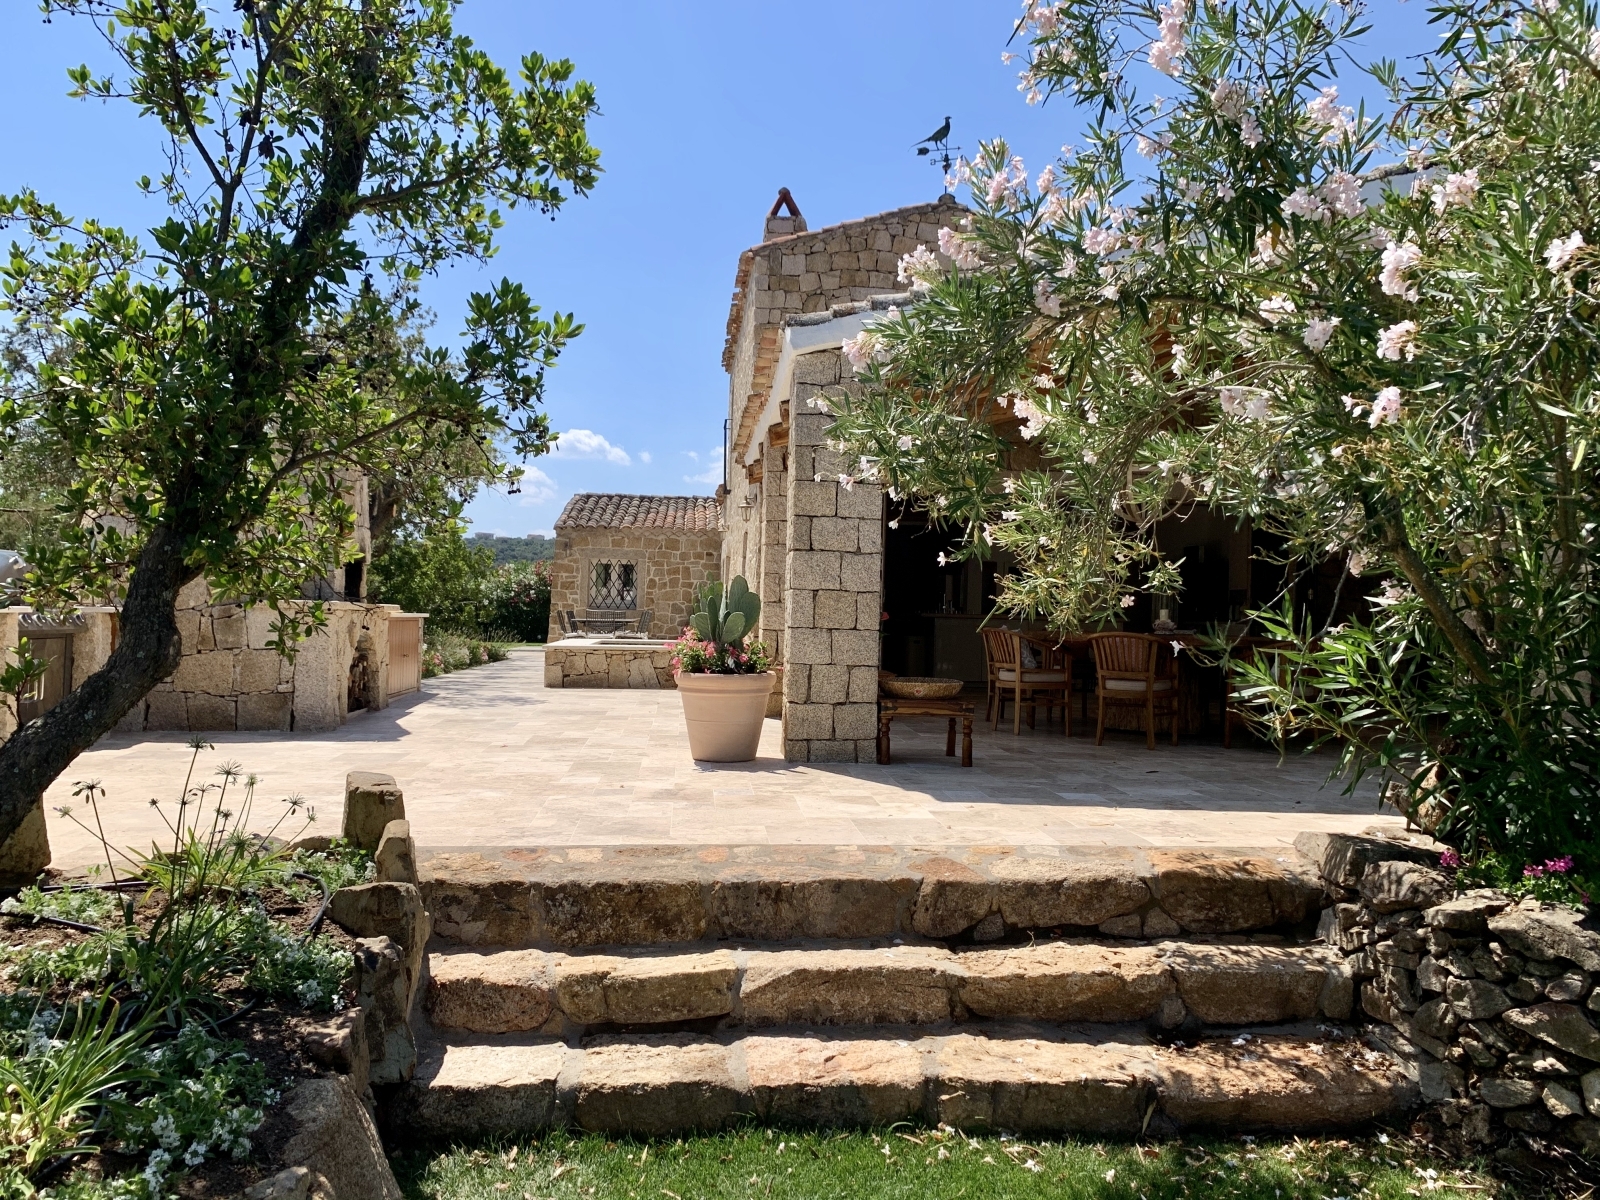 Garden with oleander, trees, cactus and outdoor dining areas at Villa Pantaleo on Sardinia, Italy